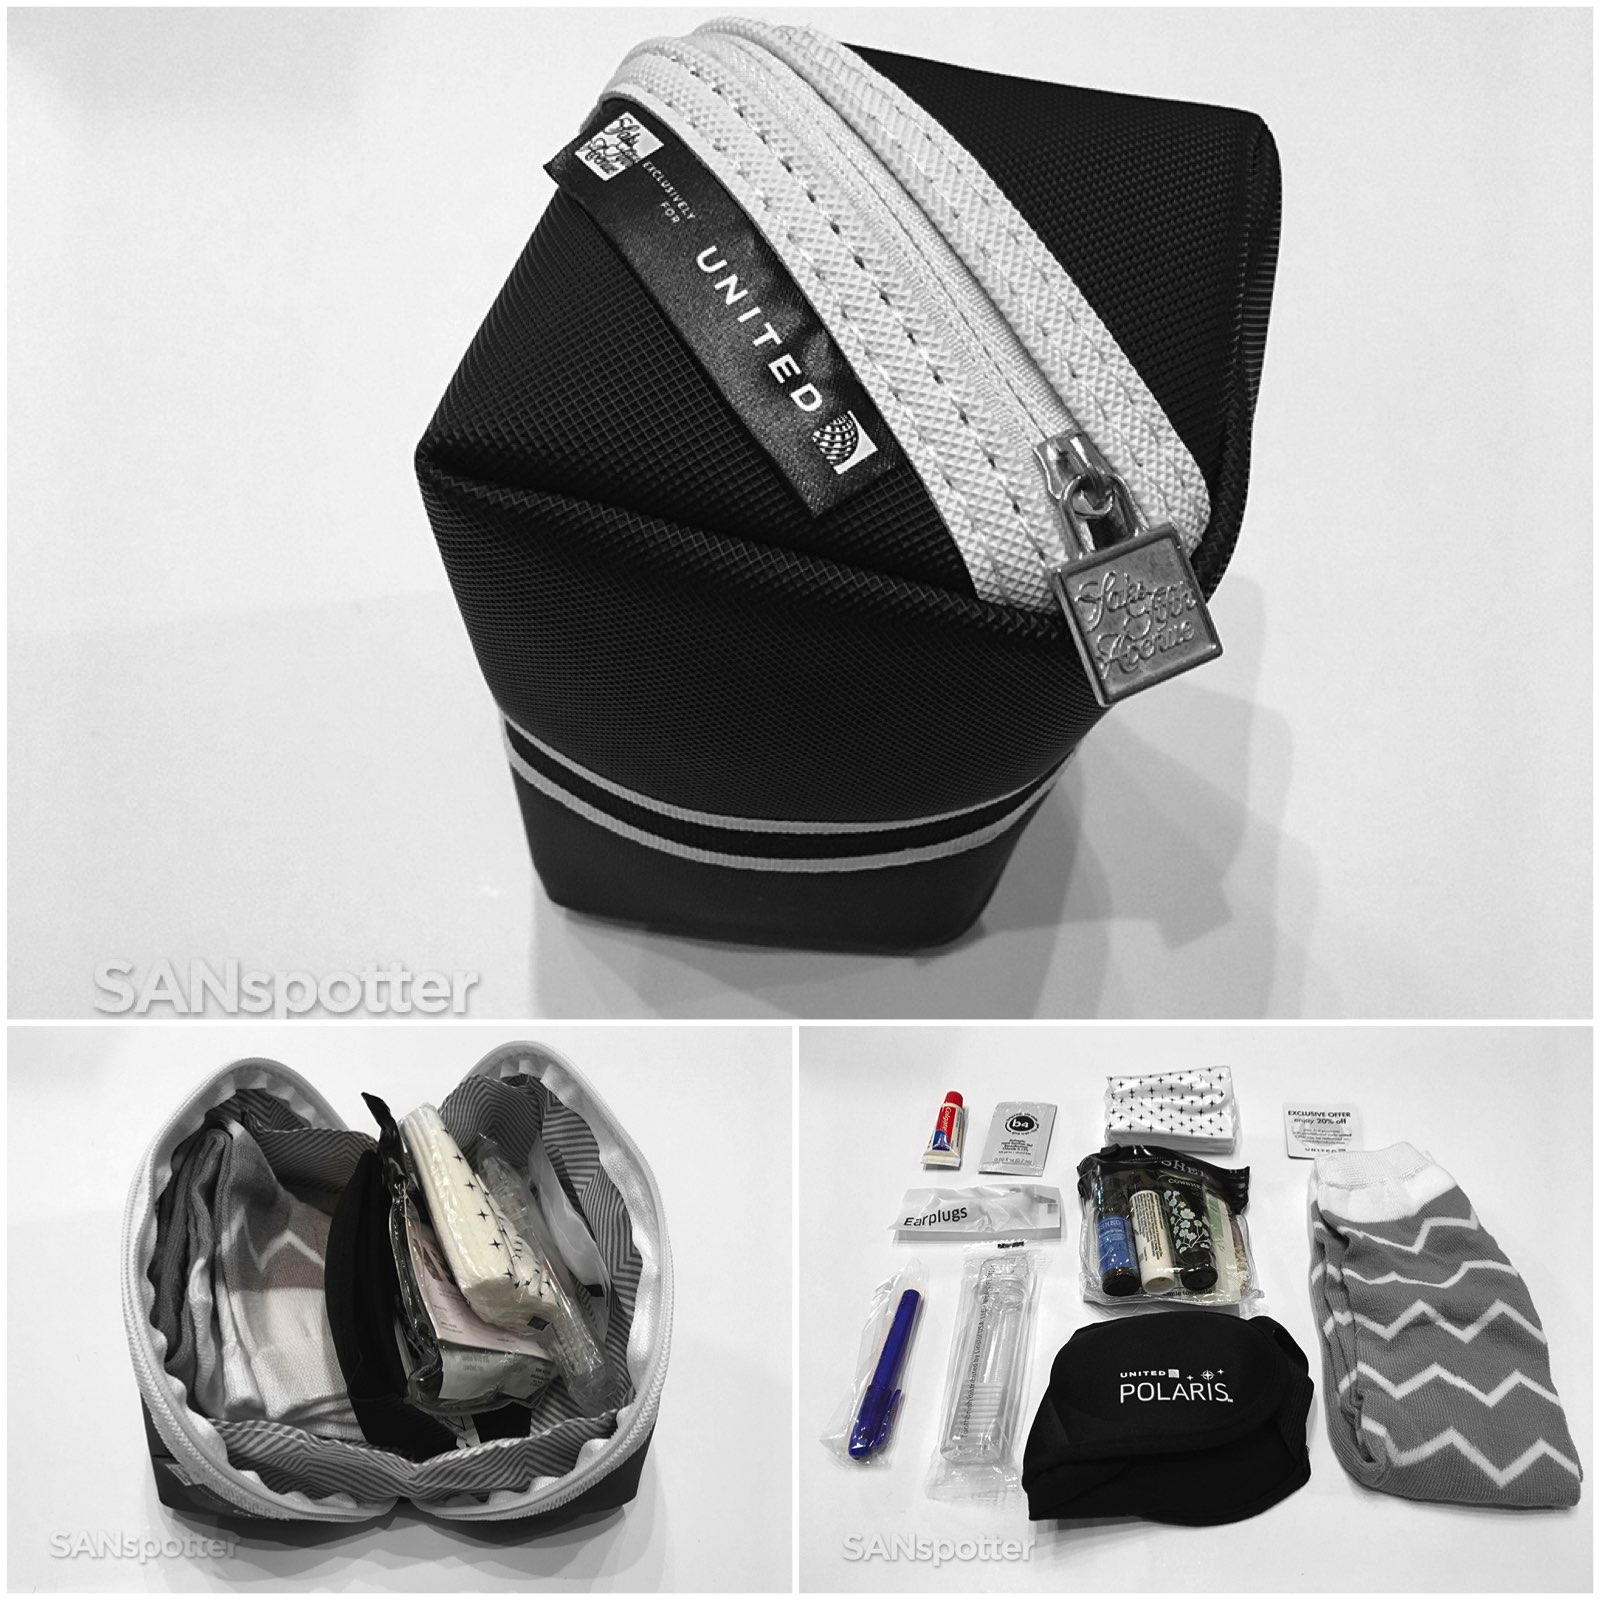 United Airlines Polaris business class amenity kit contents